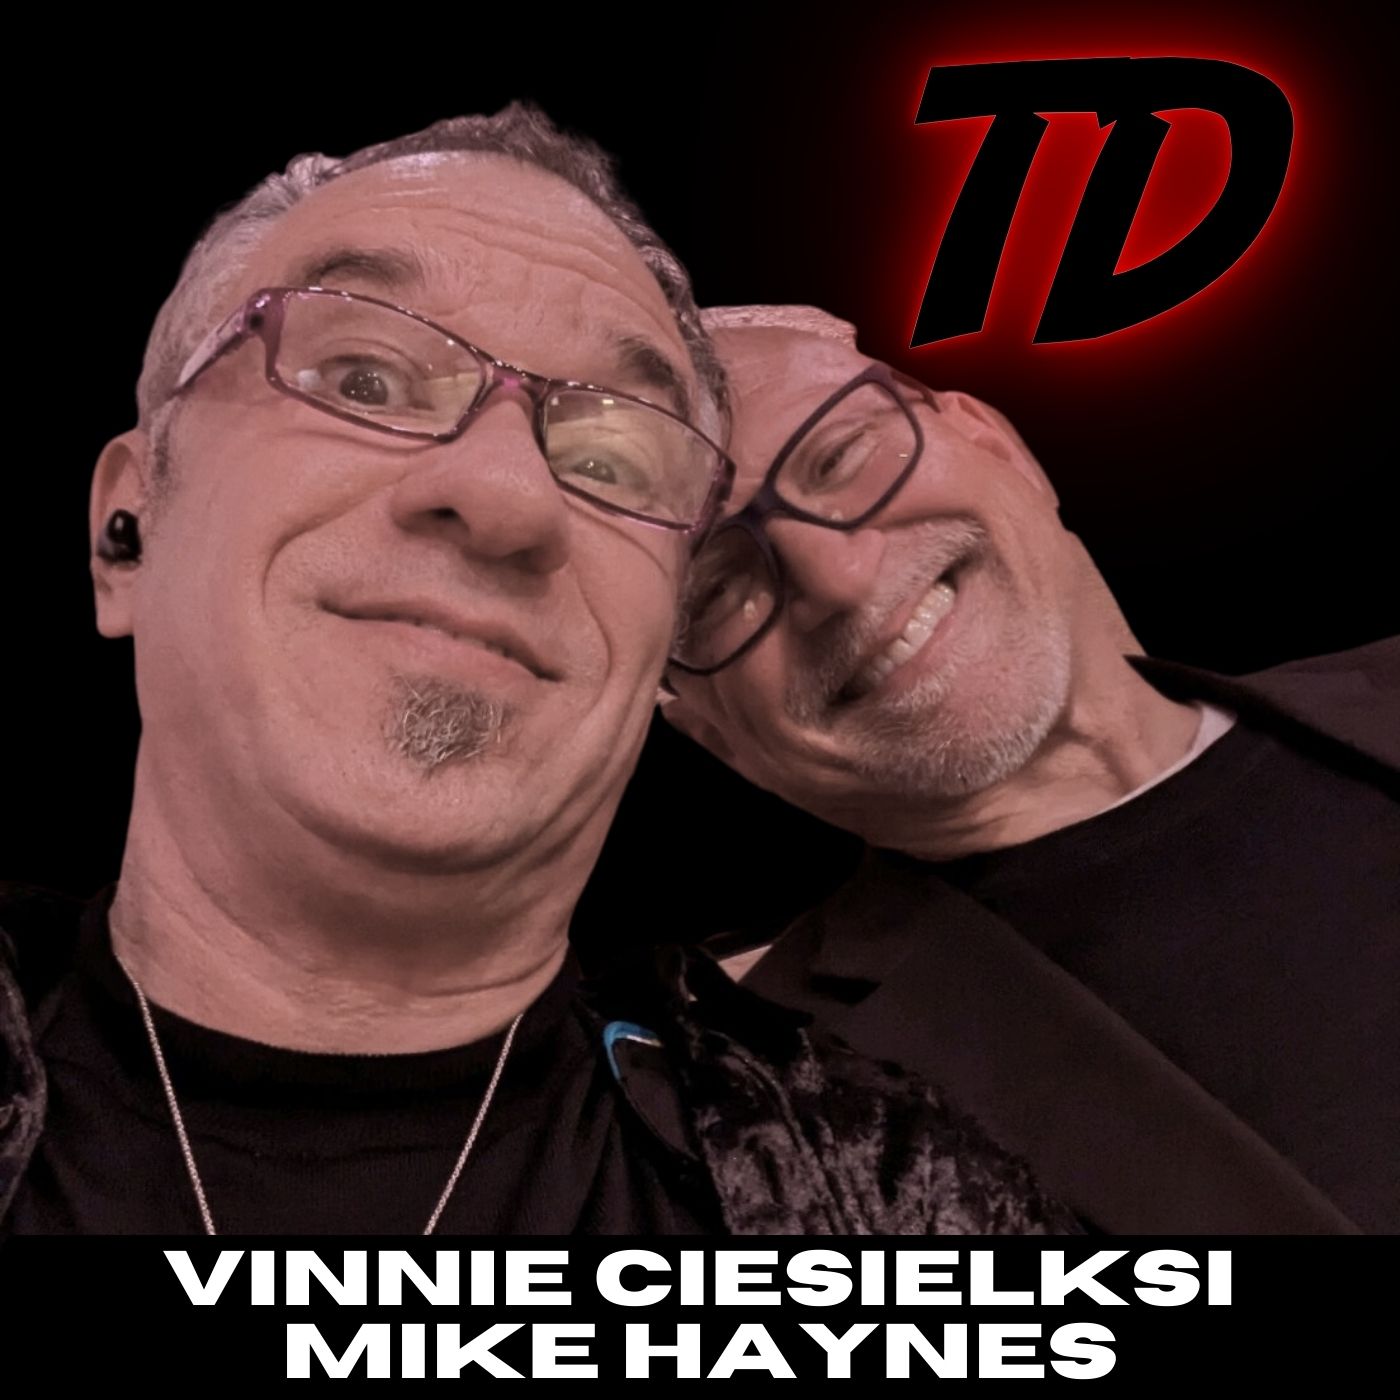 Vinnie Ciesielski and Mike Haynes Geek Out on Nashville Music Scene, the Spirituality of Music, “Overuse Syndrome” and More!